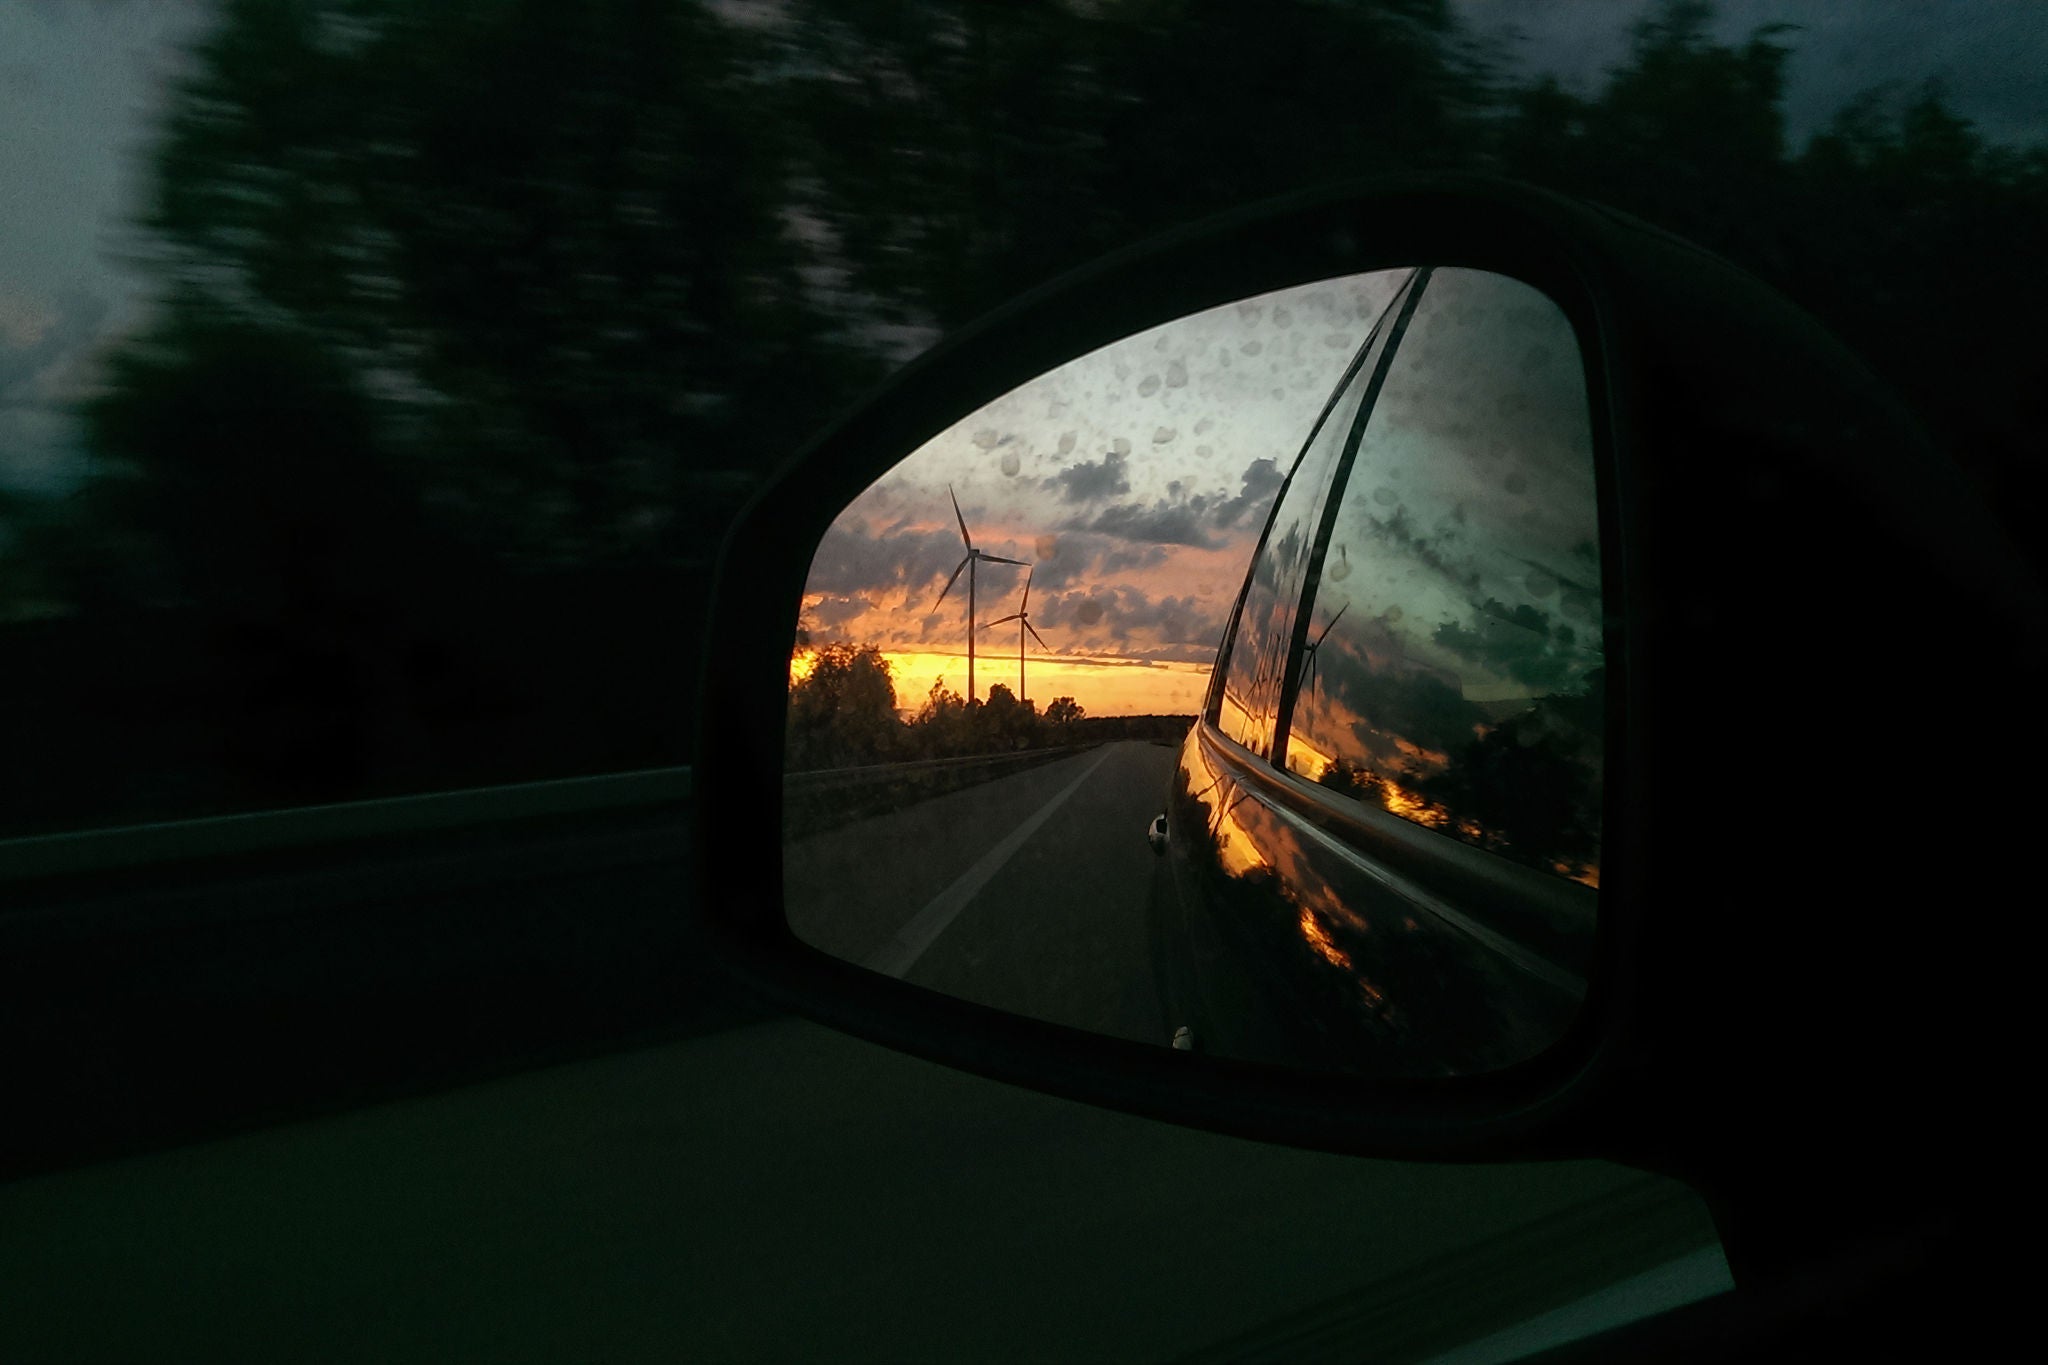 reflection of wind turbines at sunset in car side mirror